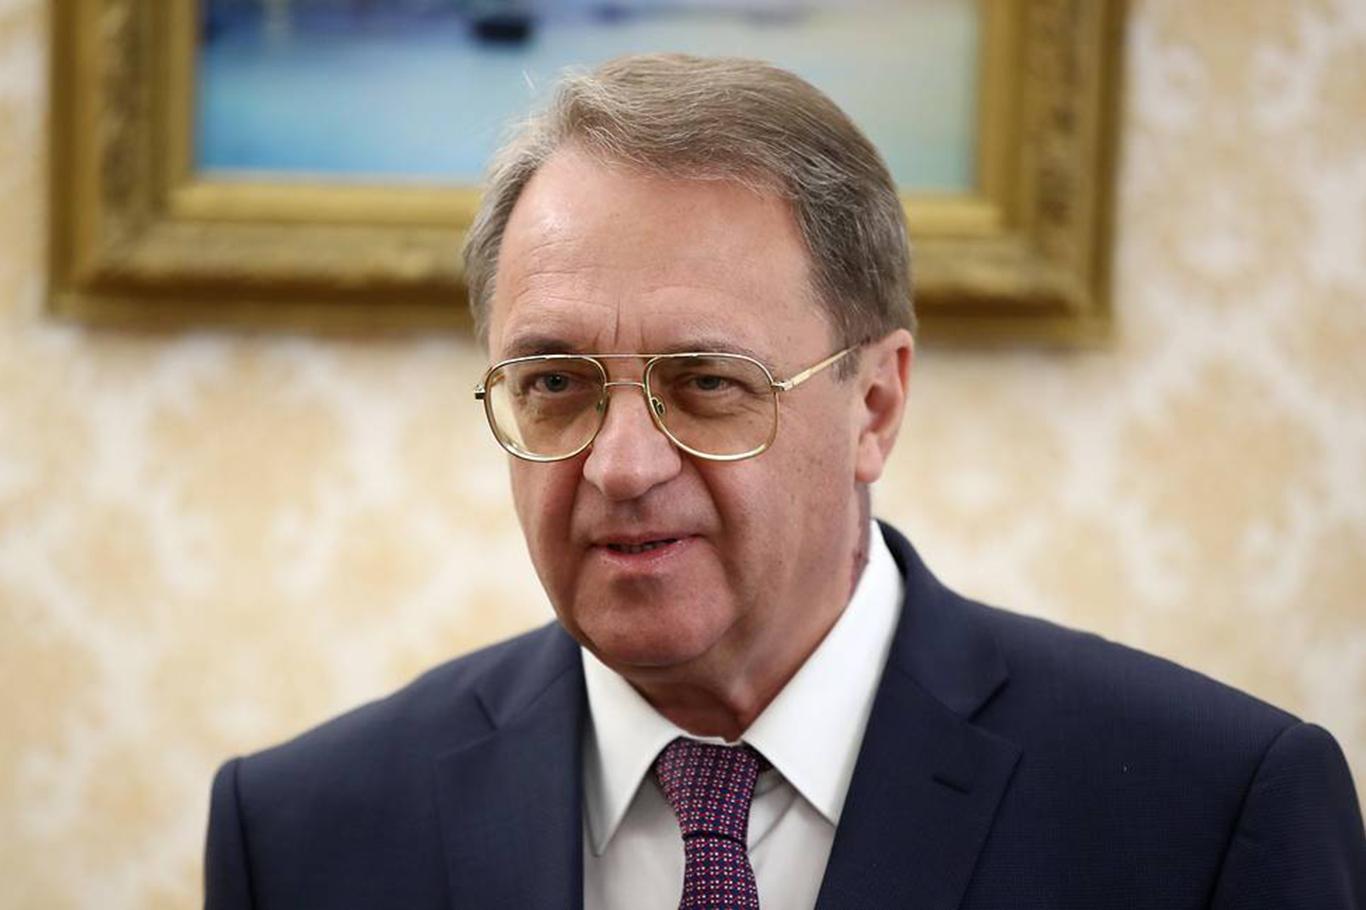 Russia: The position of the Palestinians is more important about the "Deal of the Century"